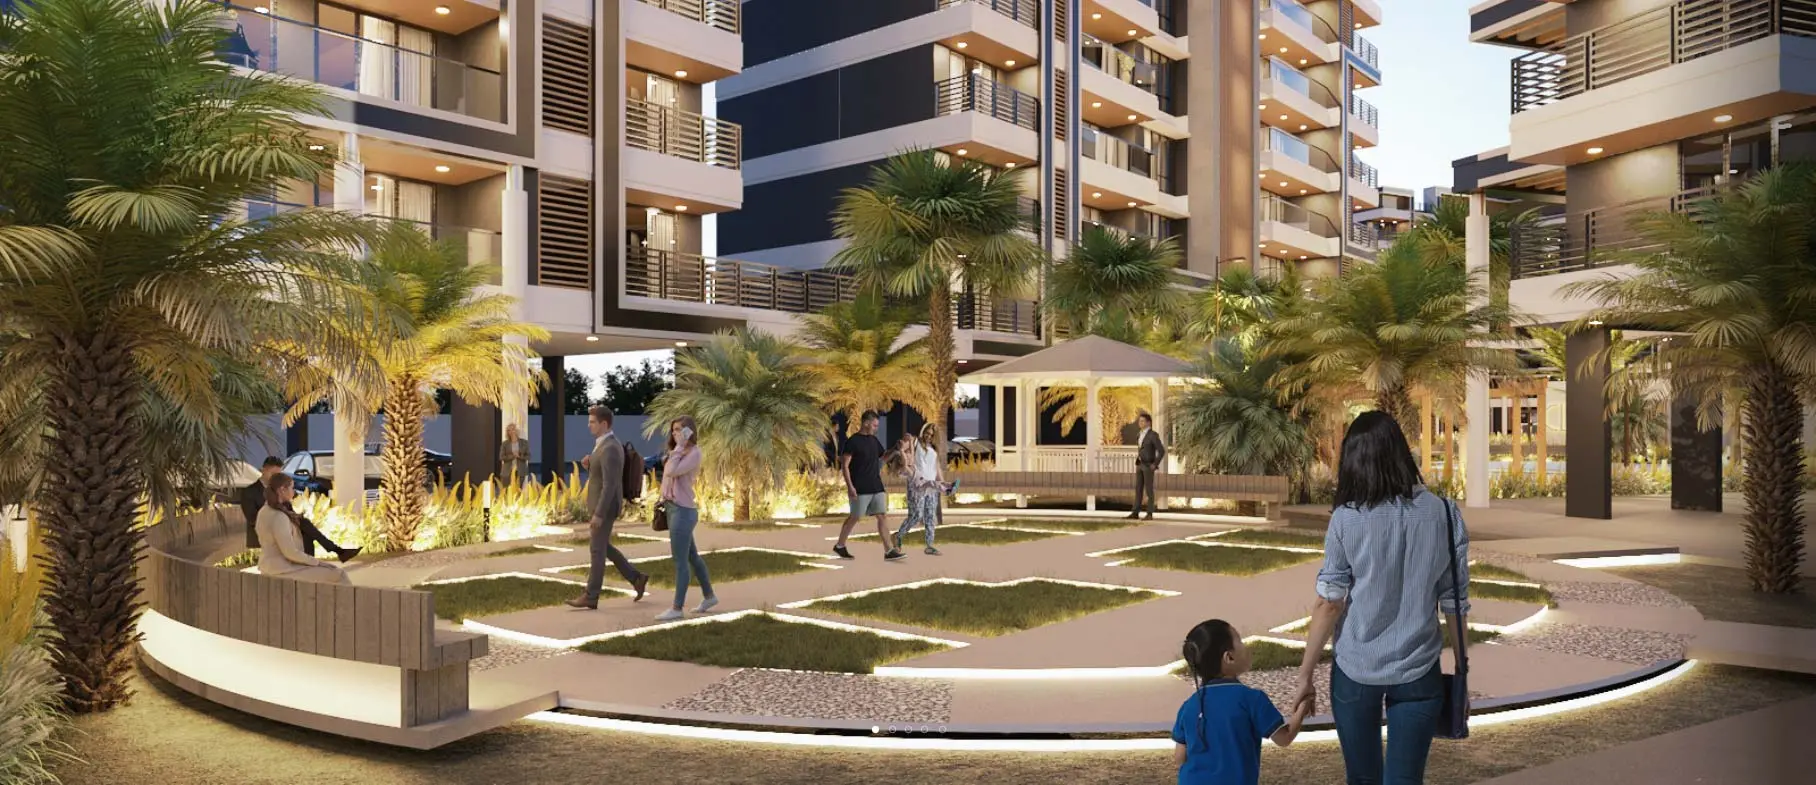 Nyati Elite Luxurious 3 & 4.5 bhk flats in modern apartment complex with palm trees